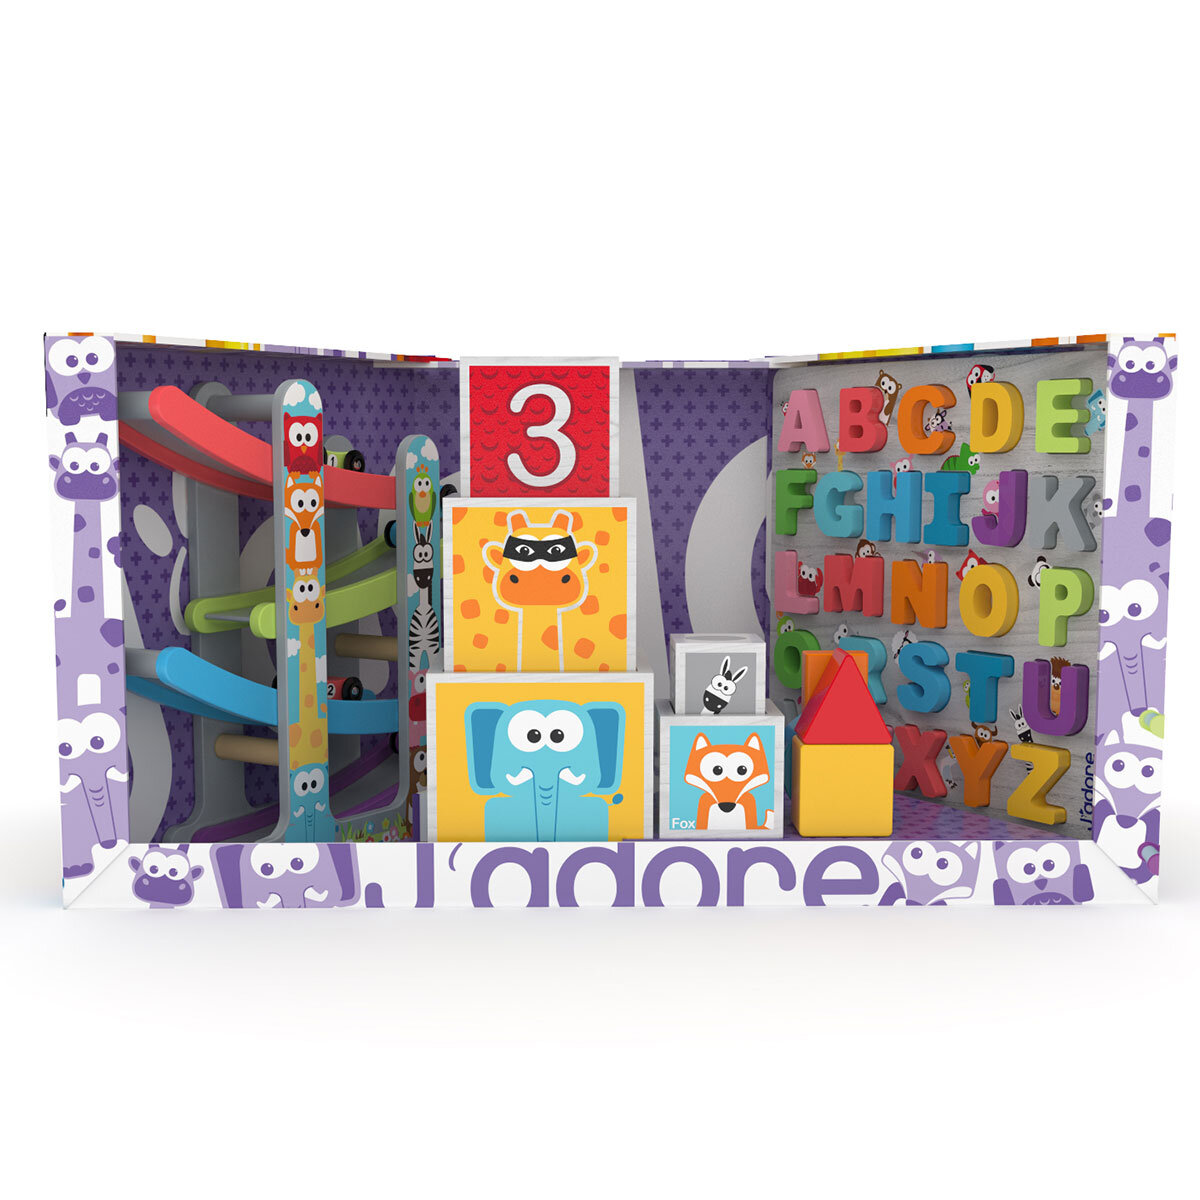 J'ADORE 3-in-1 Wooden Toys Gift Set (18 Months+)